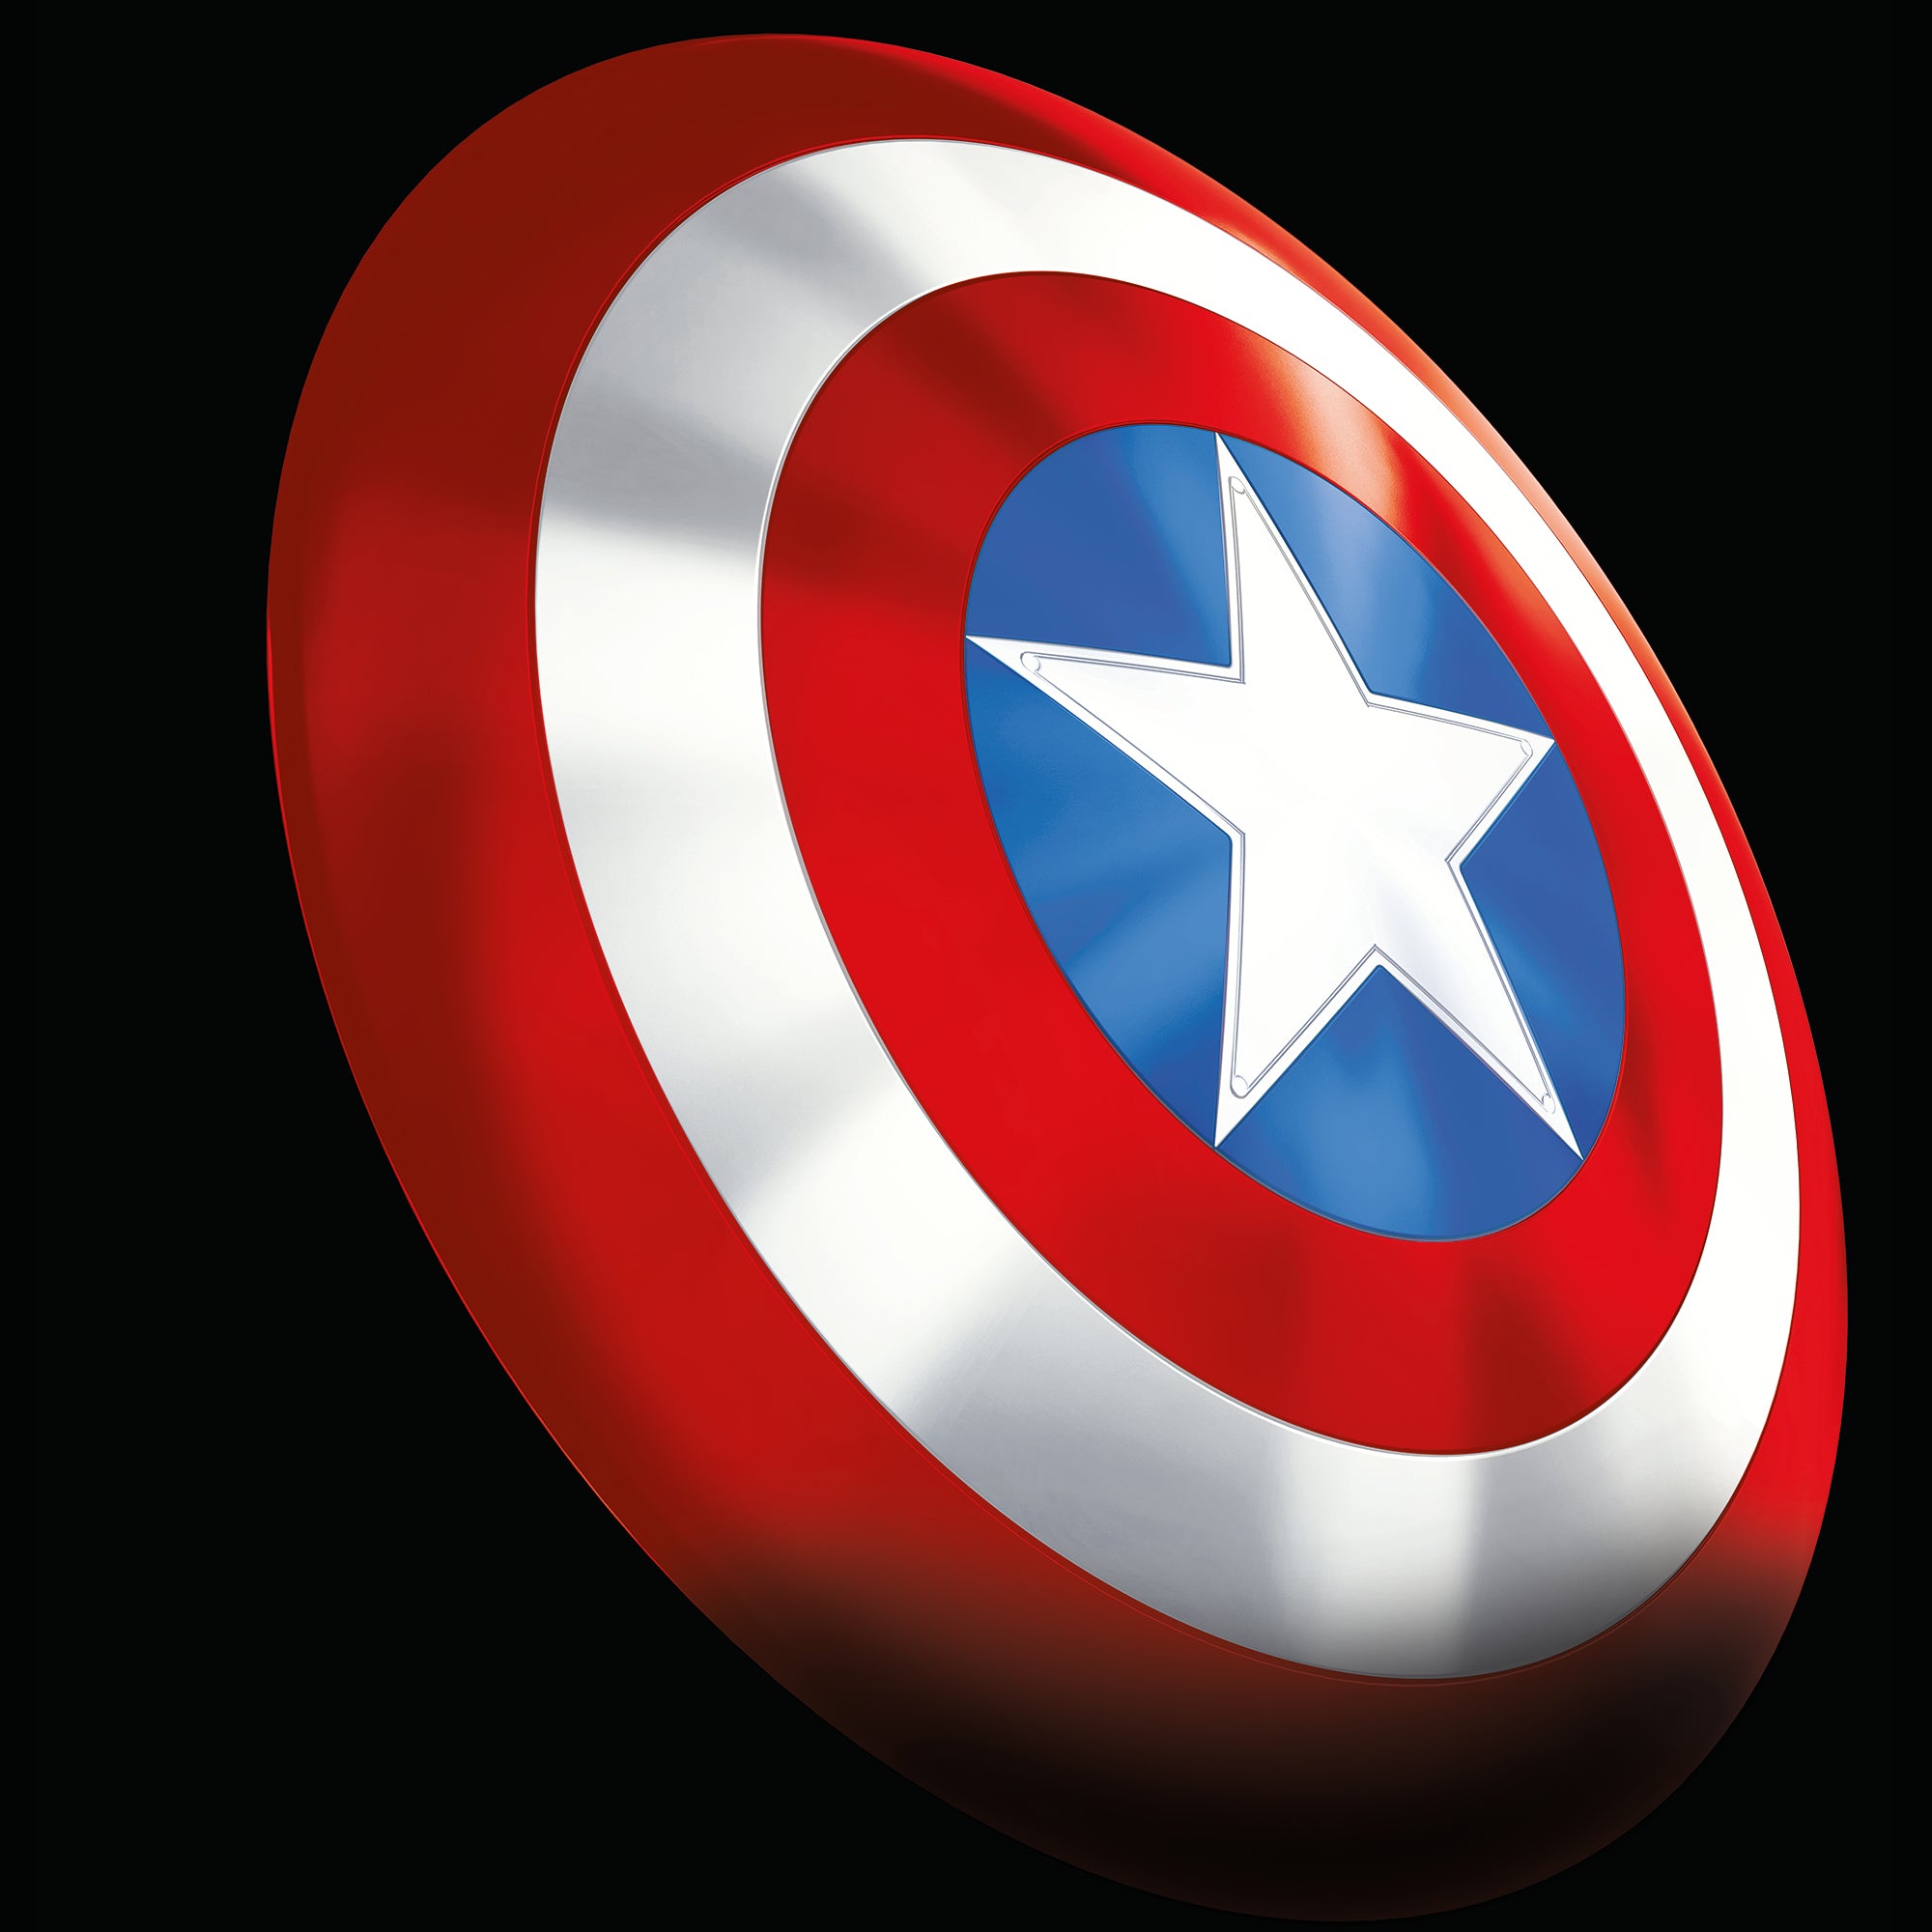 Captain America's Shield screenshots, images and pictures - Comic Vine